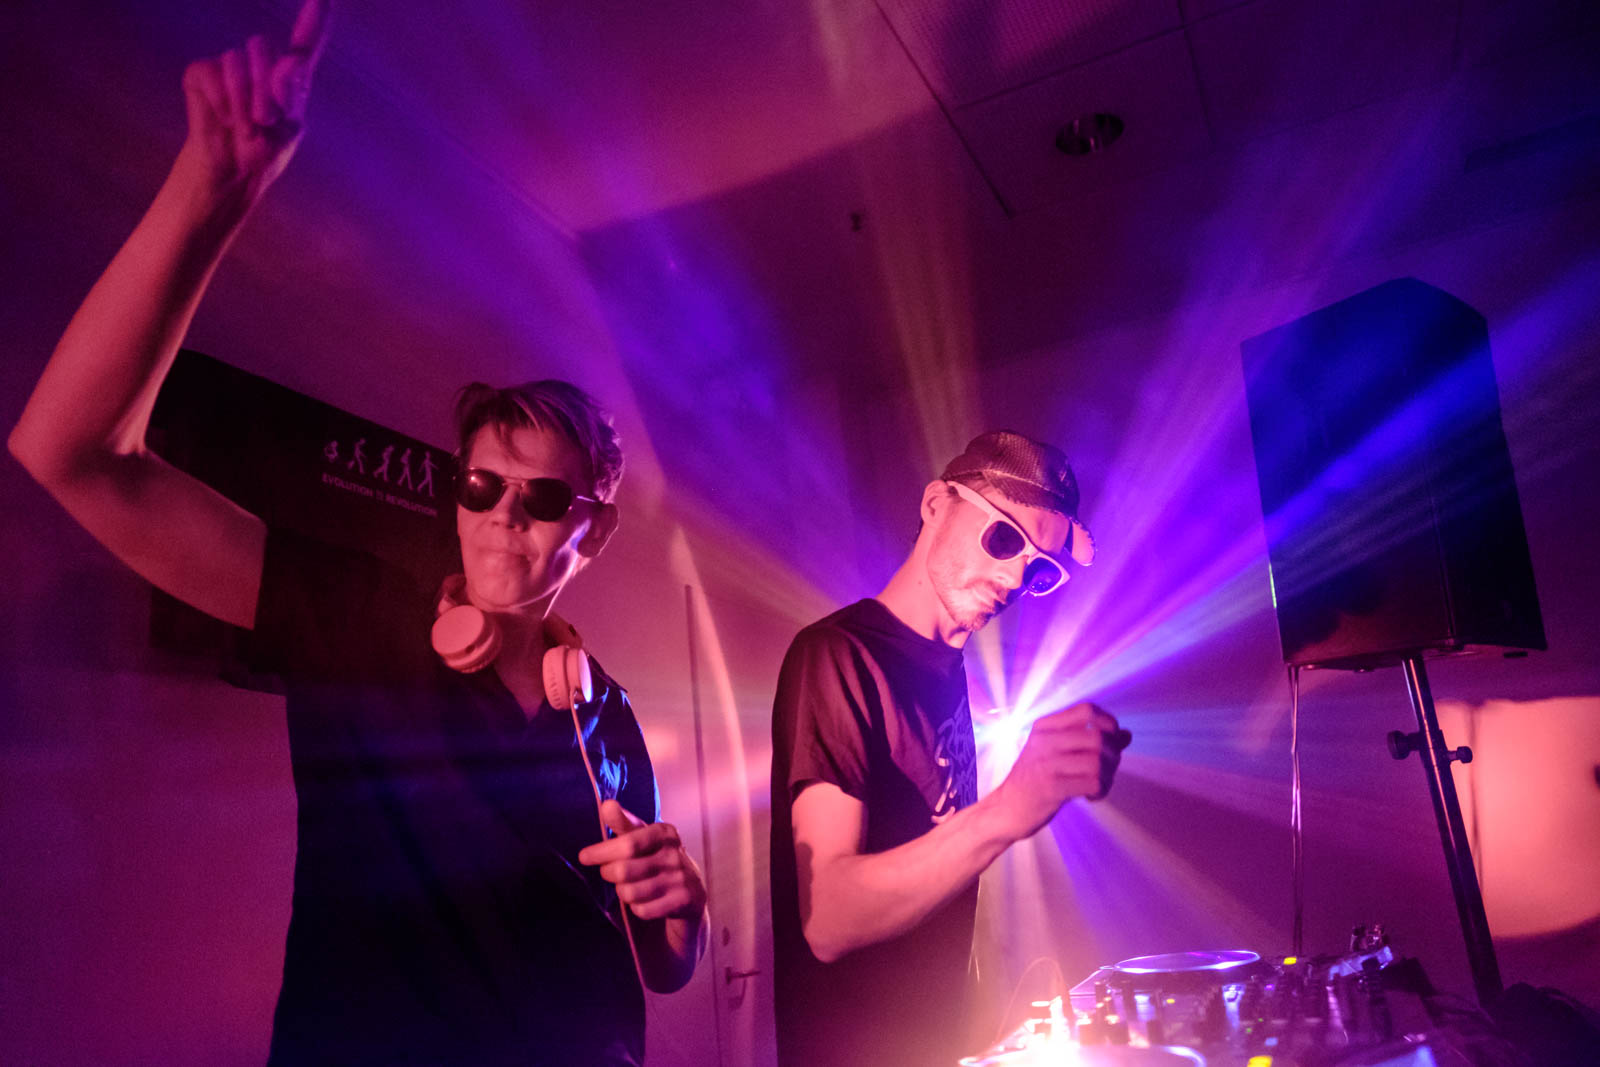 A dream comes true! Tag Team DJing with Copyflex. Image by Charlene Winfred.